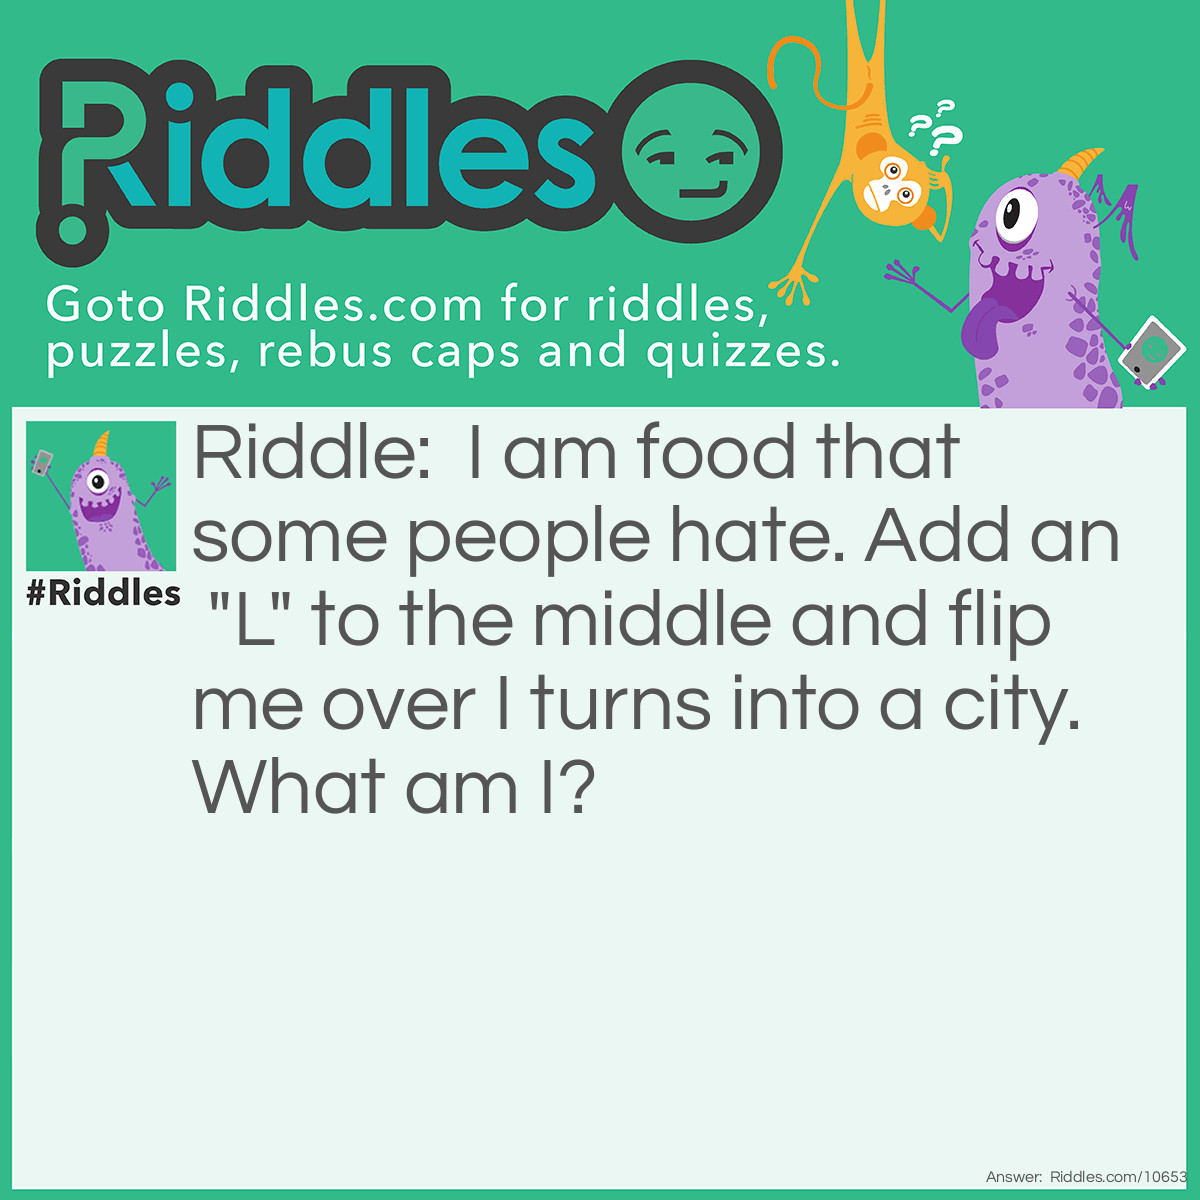 Riddle: I am food that some people hate. Add an "L" to the middle and flip me over I turns into a city. What am I? Answer: Salad.